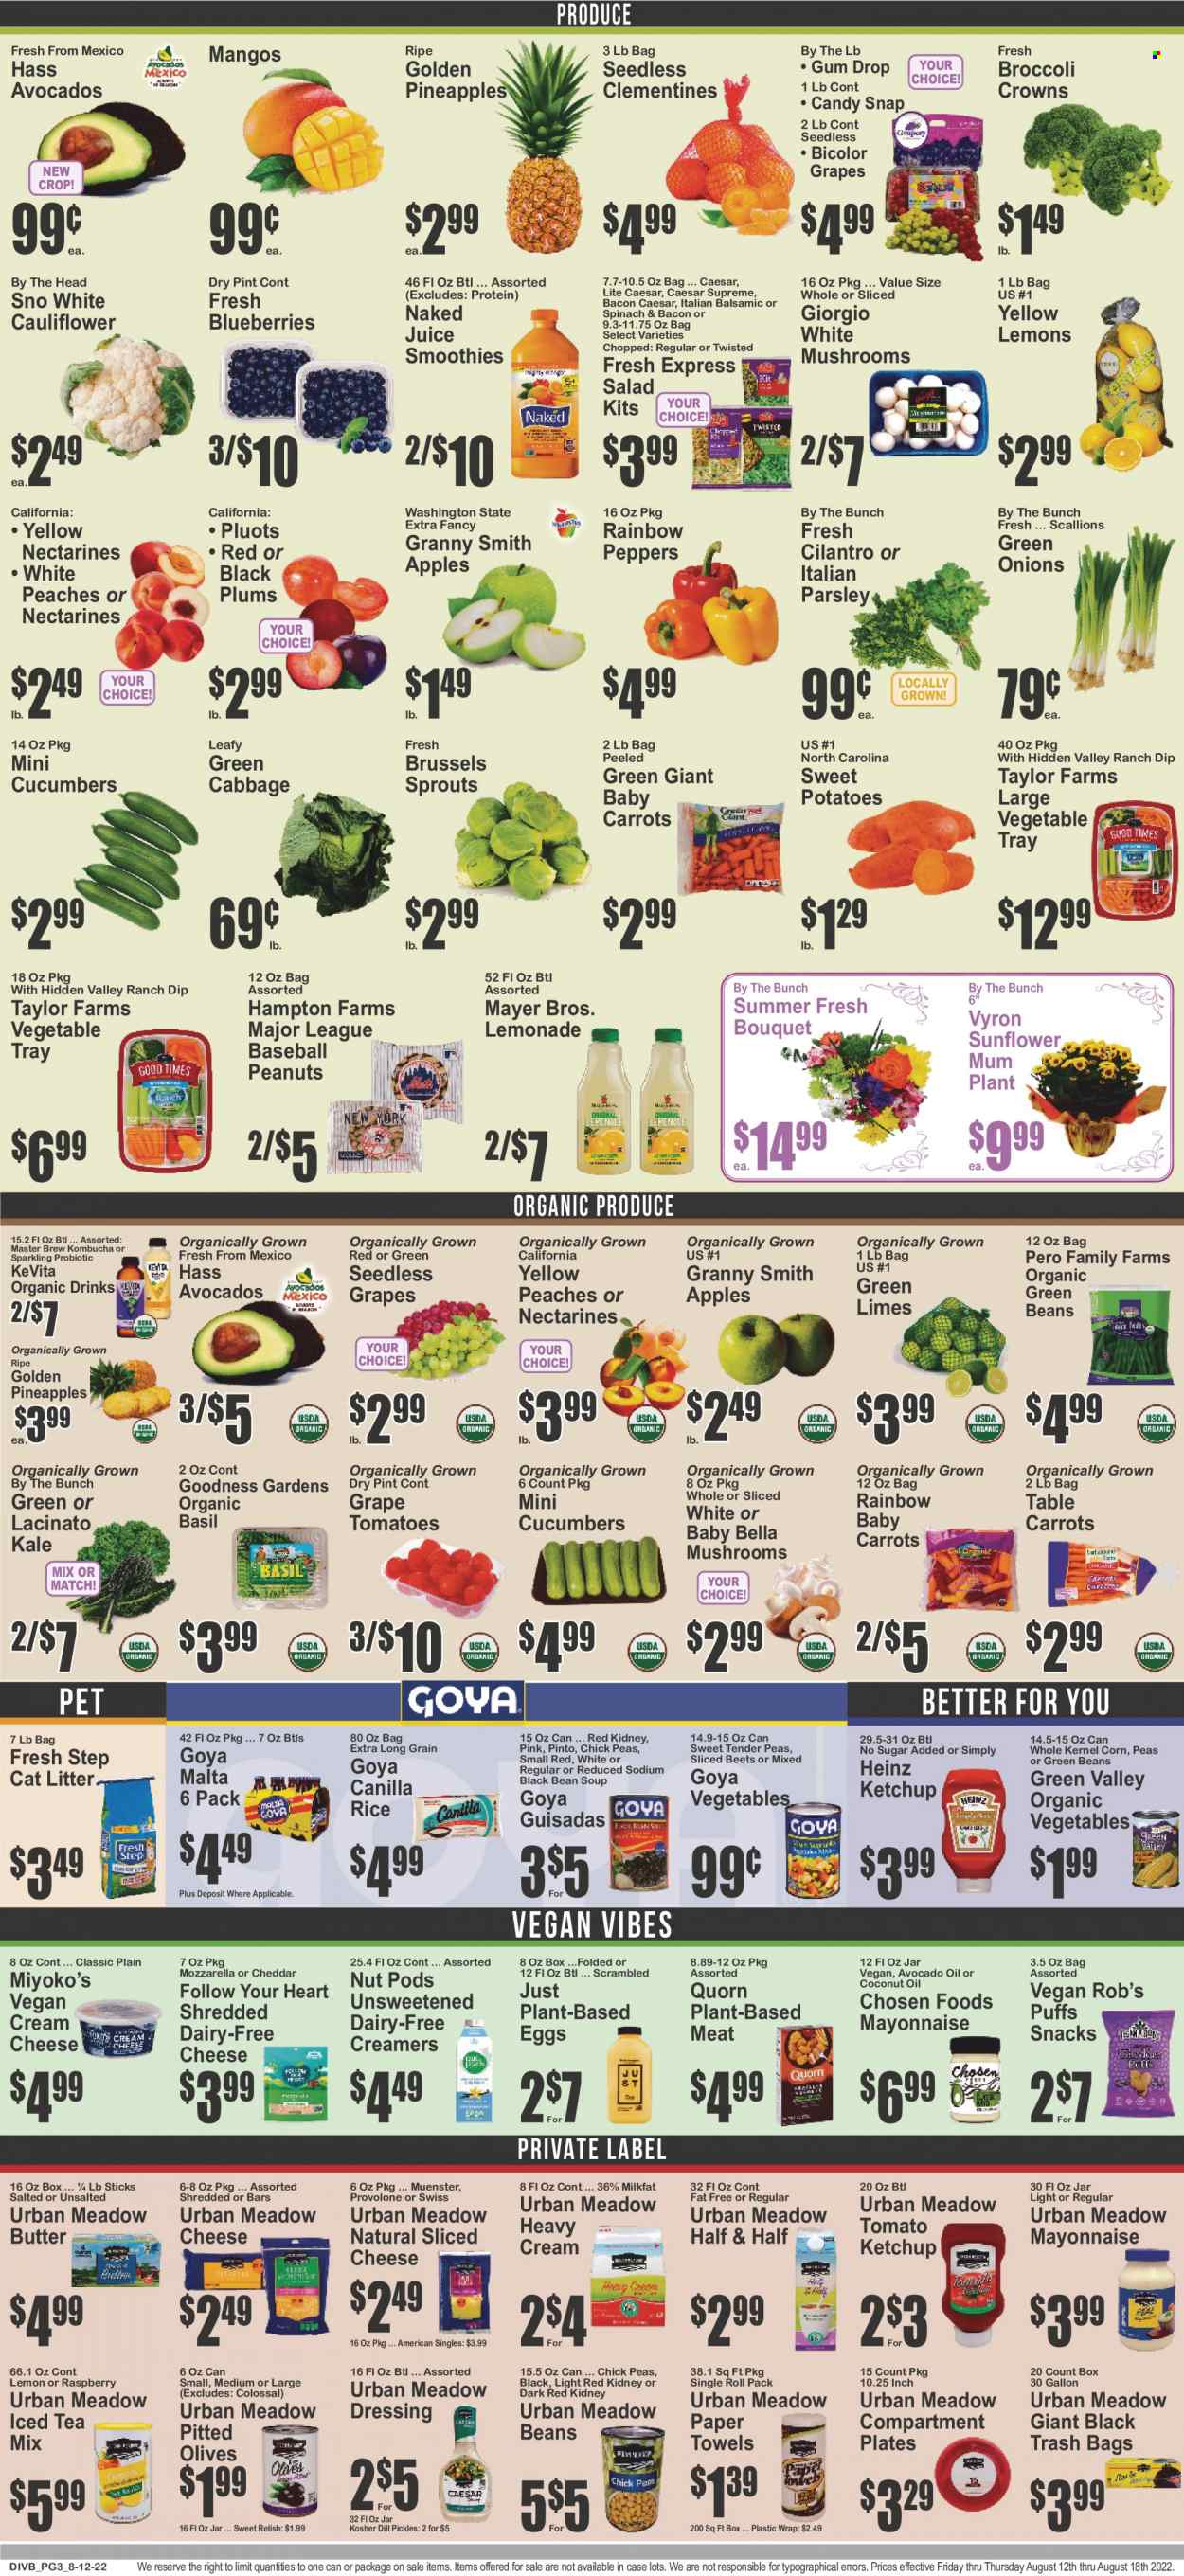 thumbnail - Food Dynasty Flyer - 08/12/2022 - 08/18/2022 - Sales products - mushrooms, puffs, beans, cabbage, carrots, corn, cucumber, green beans, sweet potato, tomatoes, kale, potatoes, parsley, salad, peppers, brussel sprouts, apples, limes, seedless grapes, pineapple, plums, Granny Smith, soup, cream cheese, mozzarella, sliced cheese, Münster cheese, Provolone, eggs, butter, mayonnaise, dip, snack, Heinz, pickles, olives, Goya, rice, cilantro, dill, ketchup, avocado oil, coconut oil, peanuts, lemonade, juice, ice tea, smoothie, kombucha, KeVita, kitchen towels, paper towels, Mum, trash bags, tray, plate, cat litter, Fresh Step, sunflower, bouquet, clementines, nectarines, Half and half, lemons, black plums, peaches. Page 3.